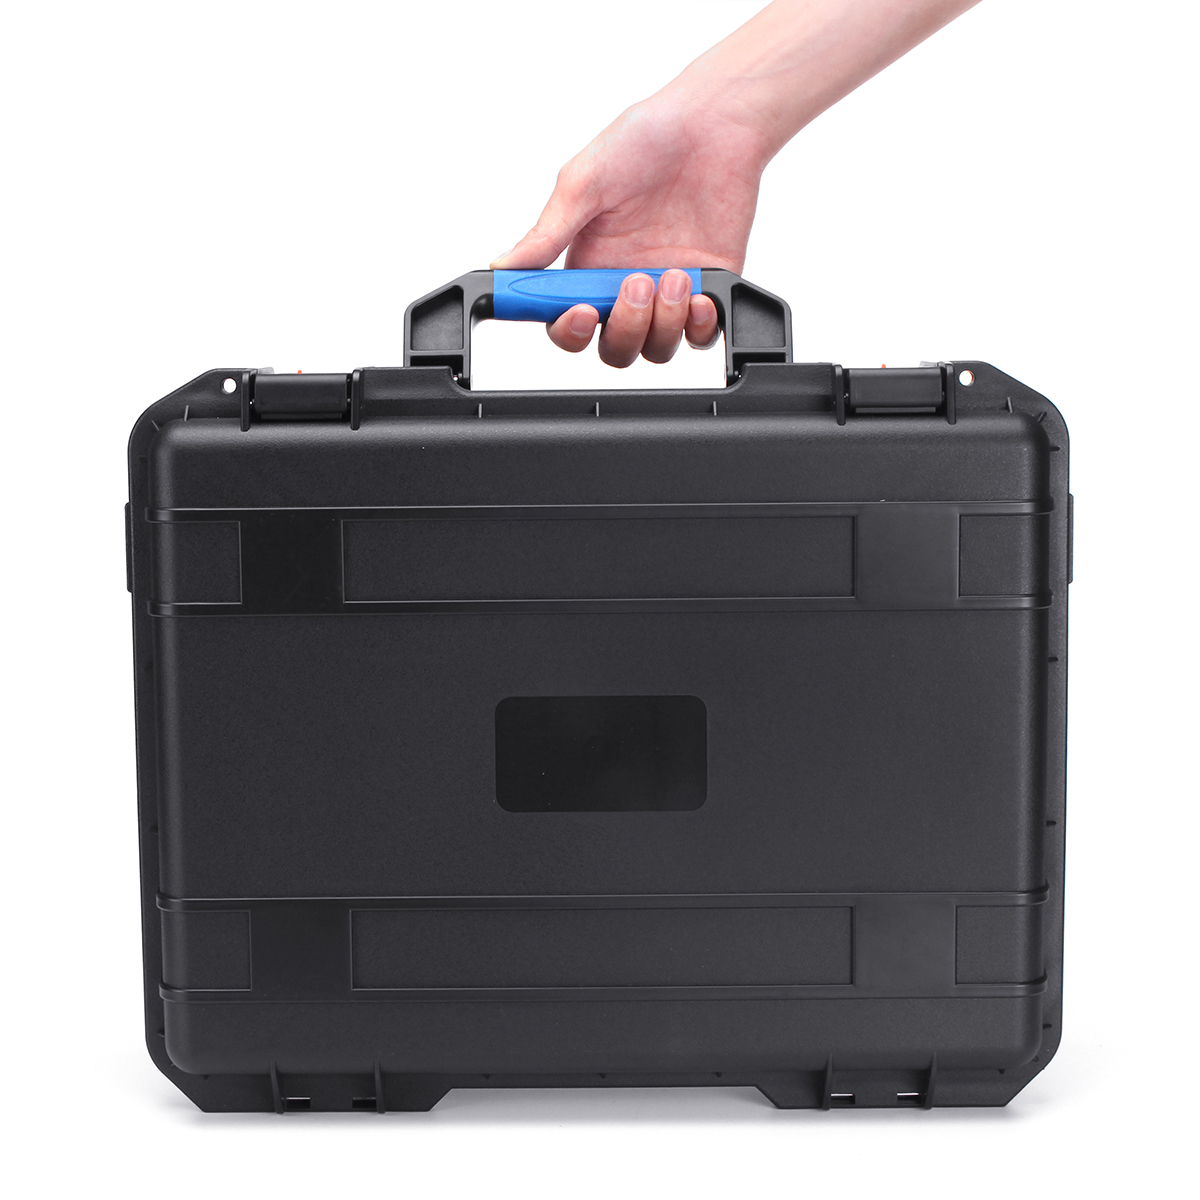 Waterproof-Hard-Carry-Case-Tool-Kits-Impact-Resistant-Shockproof-Storage-Box-Safety-Hardware-toolbox-1665199-1